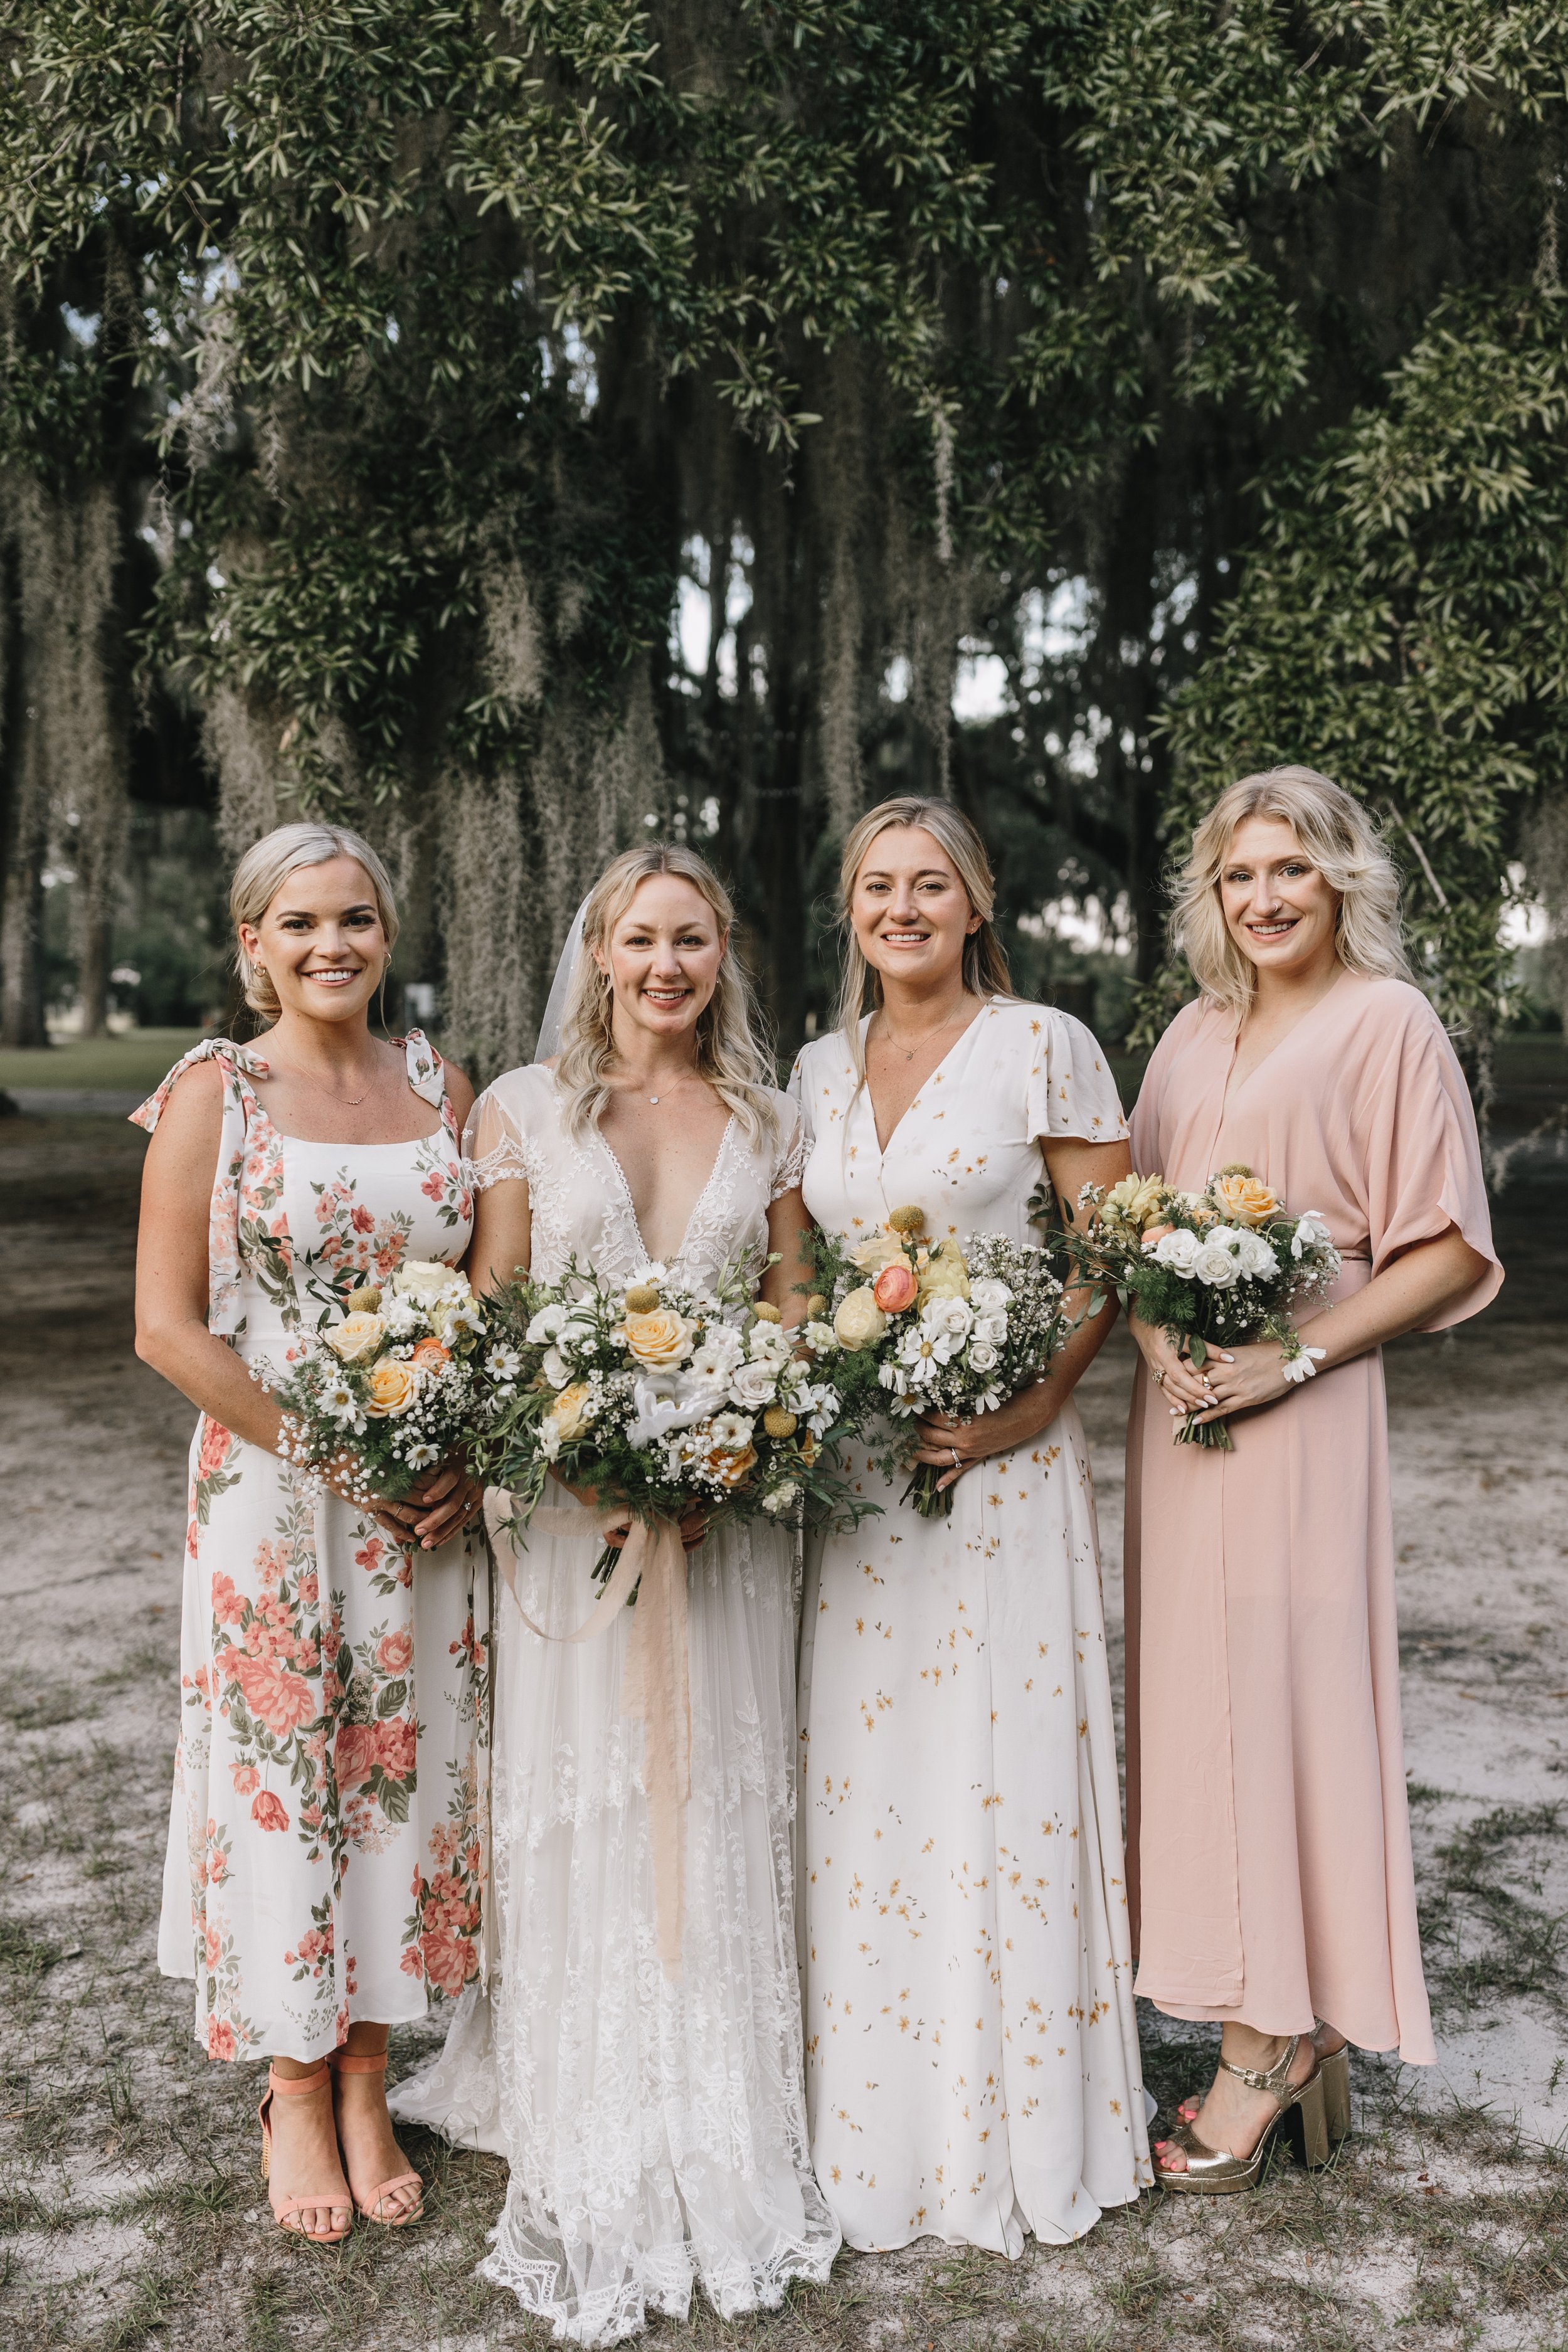 ivory-and-beau-wedding-and-florals-southern-wedding-savannah-florist-savannah-wedding-savannah-wedding-planner-the-wyld-dock-bar-historic-savannah-georgia-wedding-flowers-wedding-blog-wedding-inspiration-LAUREN+NICK_WEDDING-551.jpg